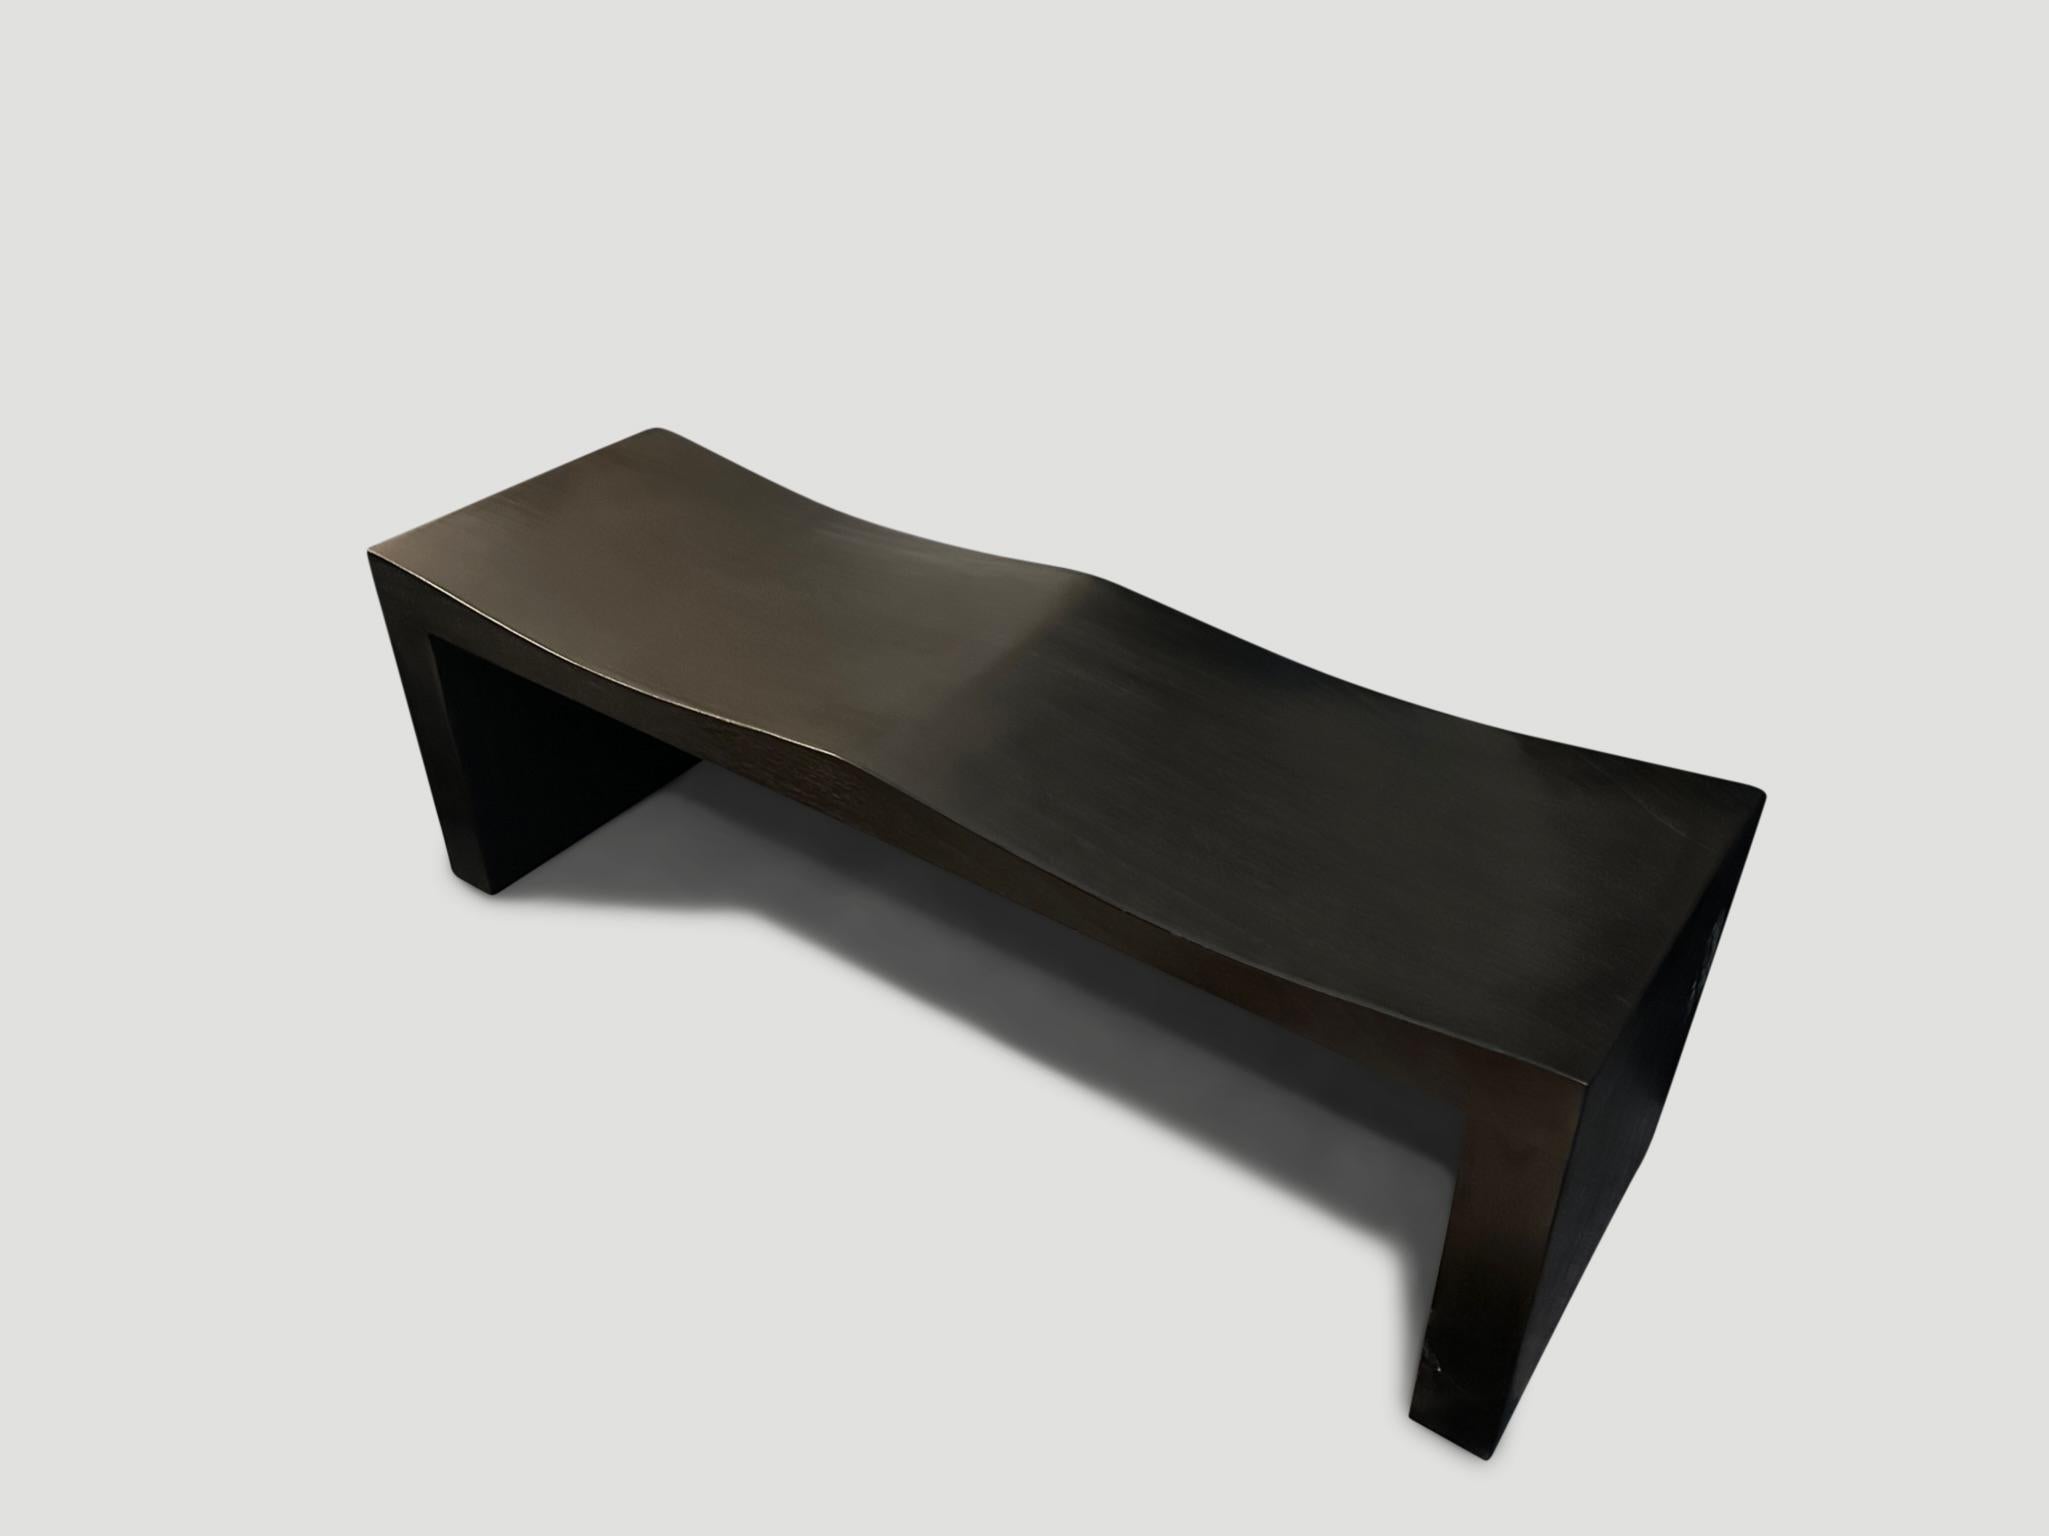 The teak wave bench represents a sleek, modern aesthetic, designed to provide comfort and durability. Solid reclaimed teak wood is hand carved into a wave design. Charred, sanded and sealed revealing the beautiful wood grain. Shown with a smooth